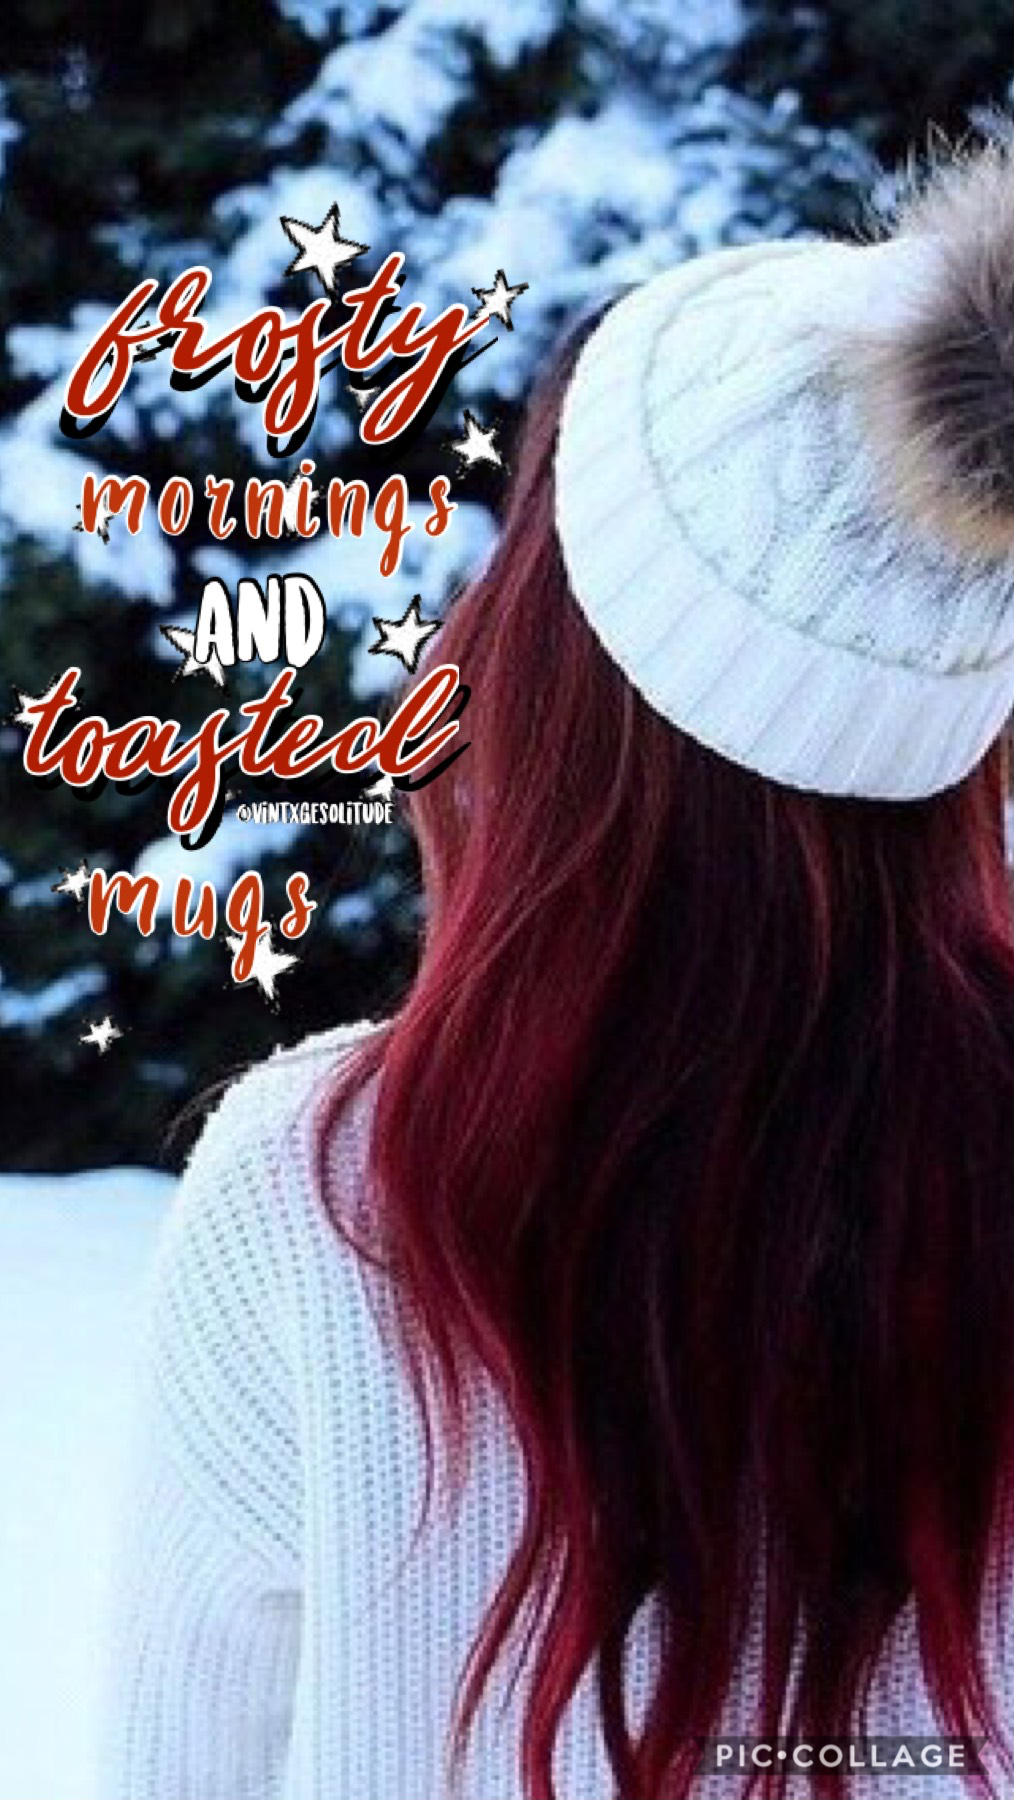 ❄️ tappapapp ☃️💙
i know it’s still autumn but it’s getting to be christmas time and i’m SO excited (rate/10?)

@vintxgesolitide xo